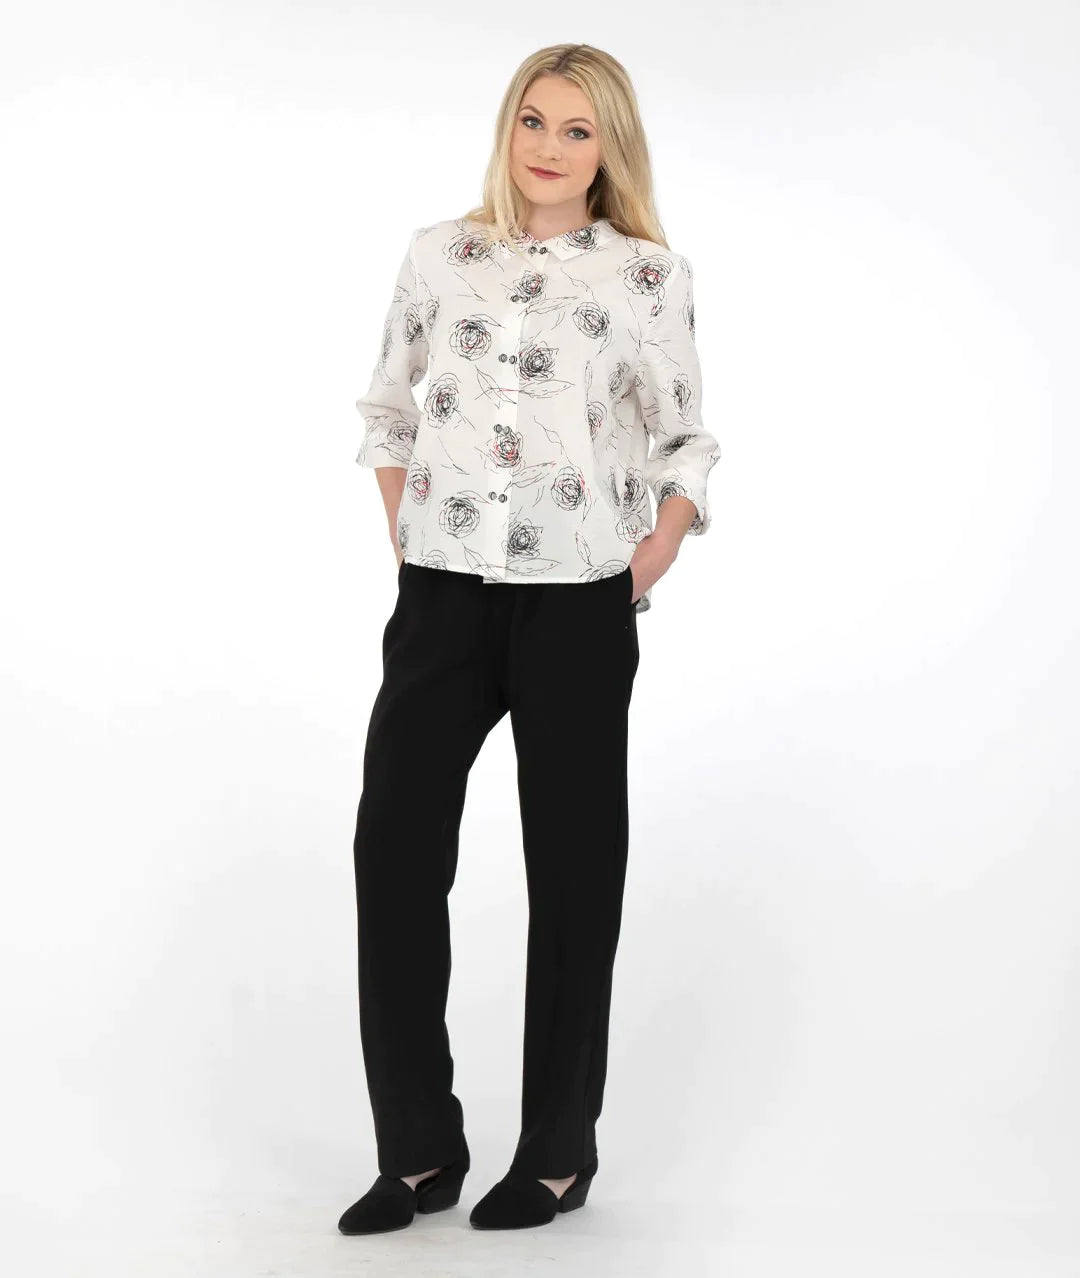 model in a white buttoned blouse with a red and black rose print, worn with black pants 